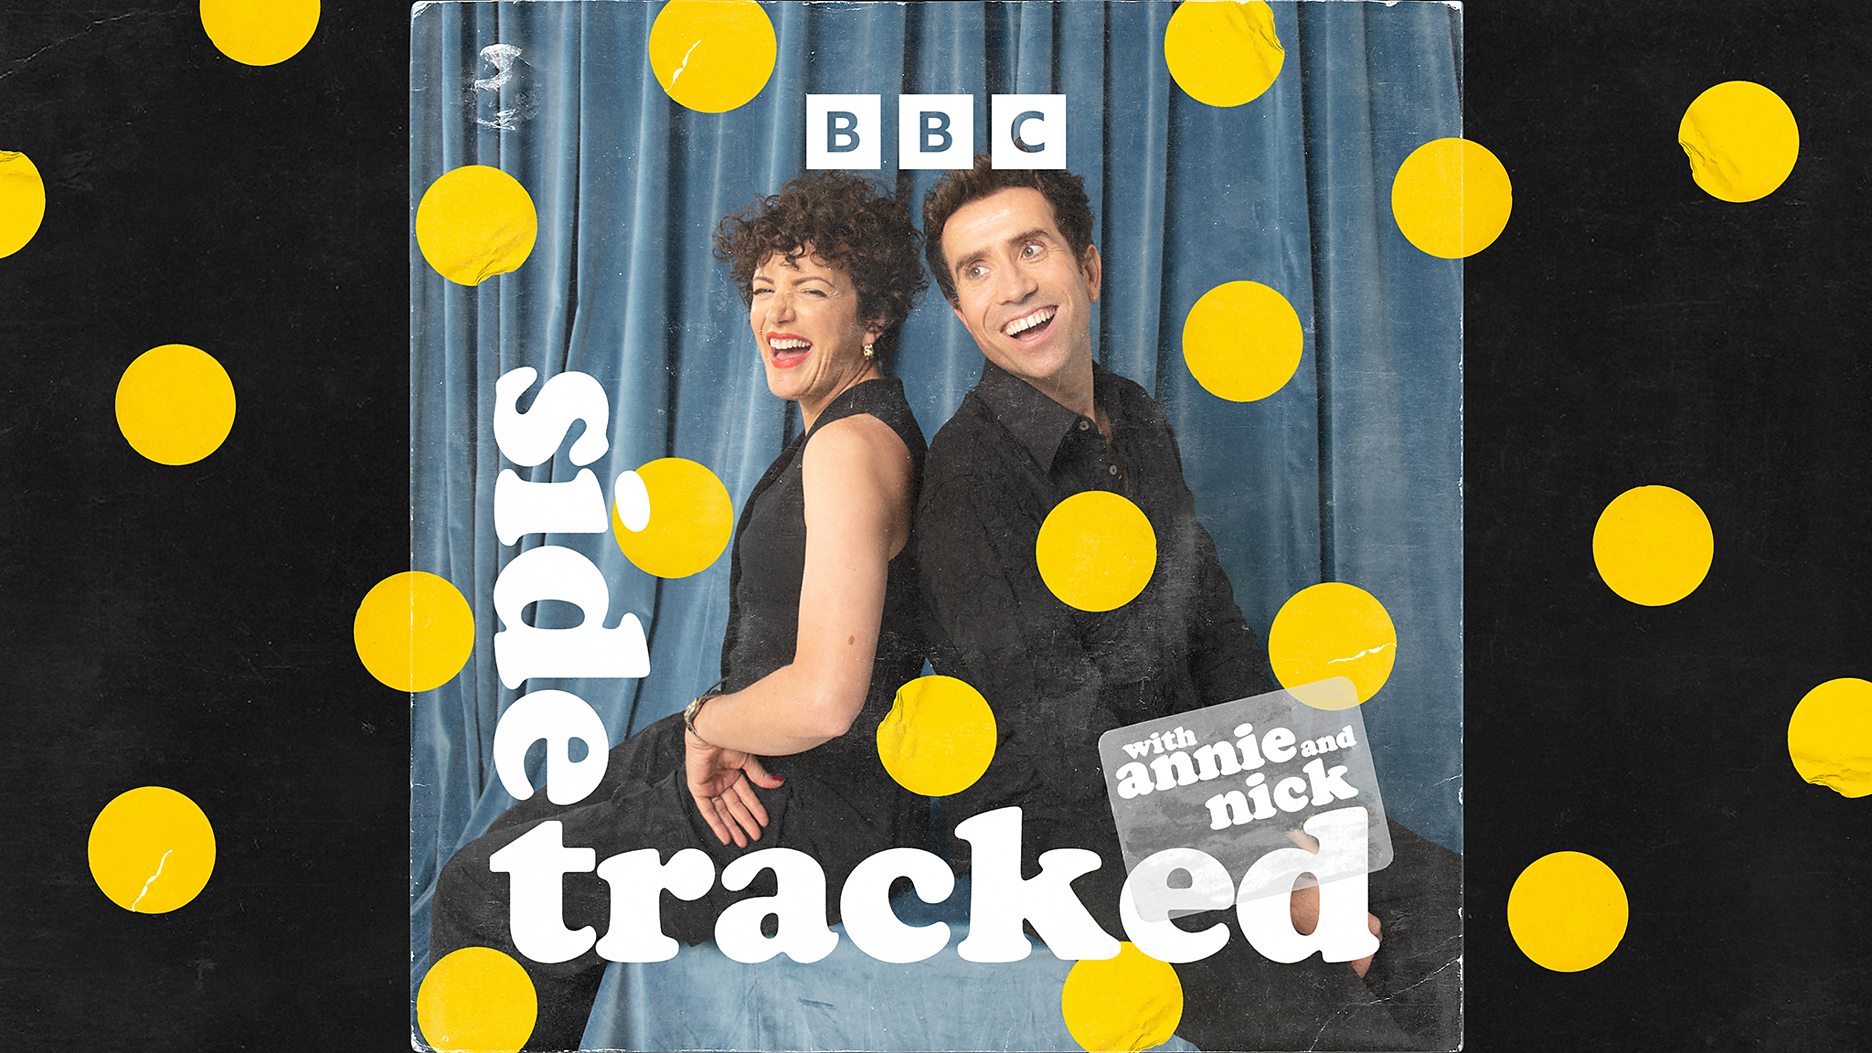 Nick Grimshaw and Annie Macmanus reunite for a new podcast on BBC Sounds